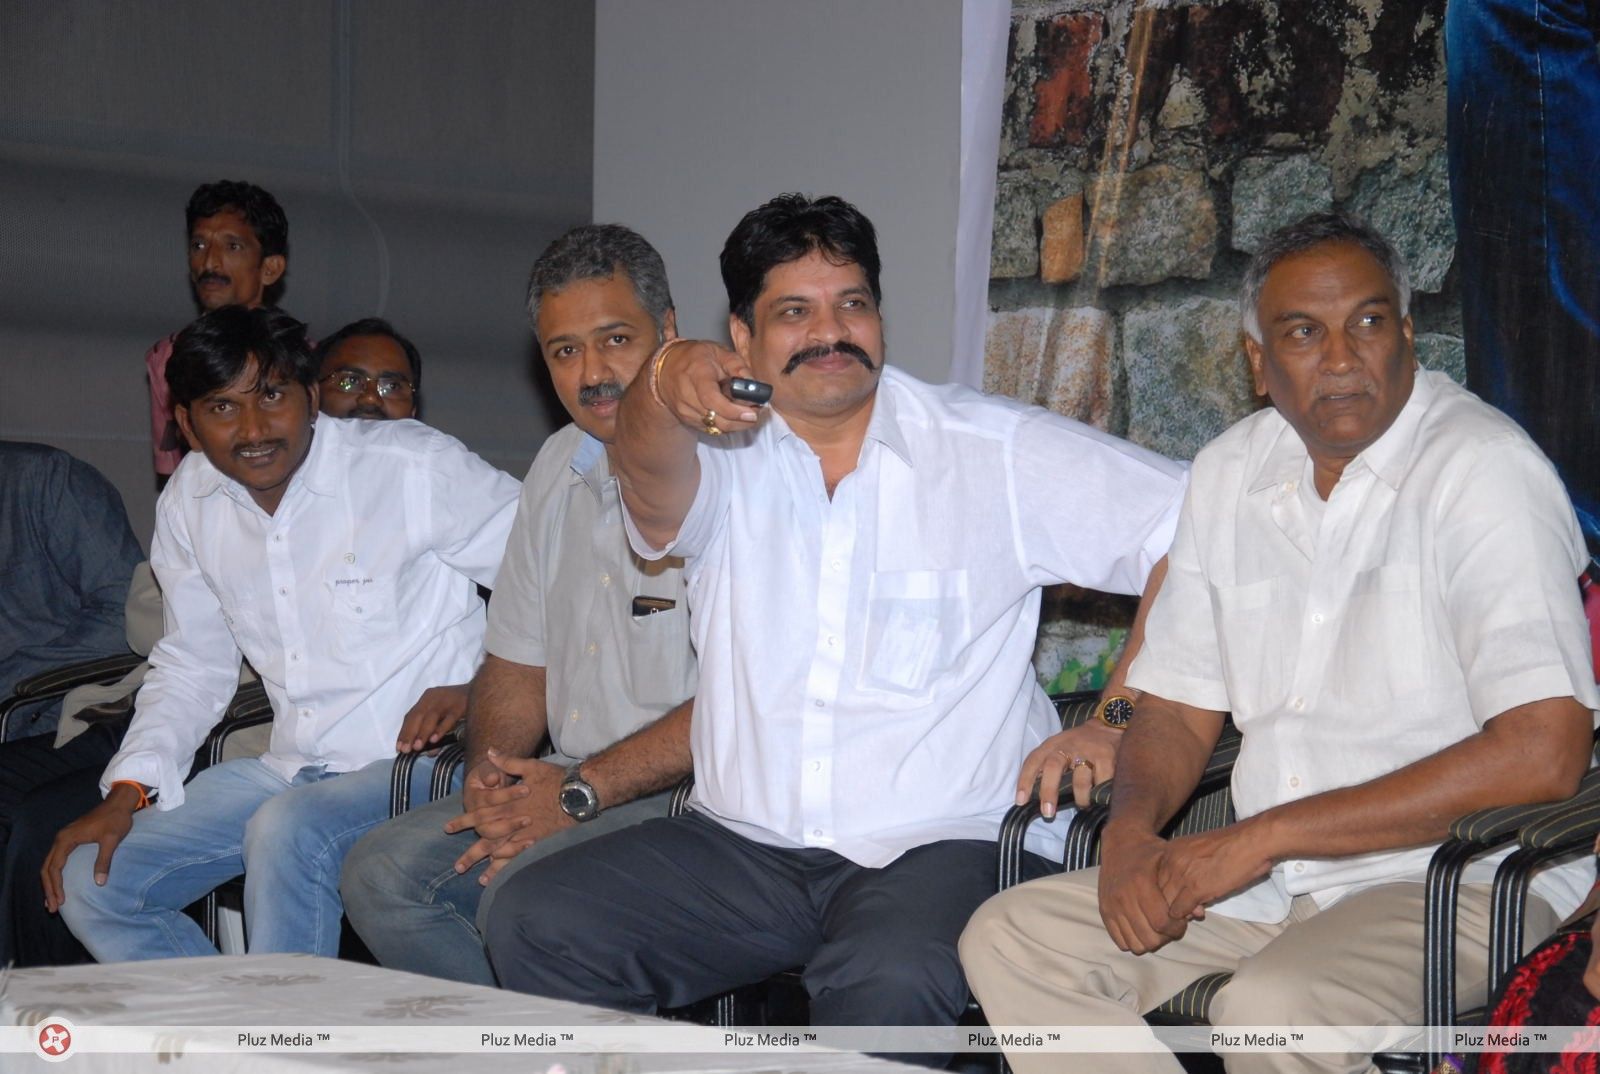 Student Star Movie Audio Launch Pictures | Picture 261930